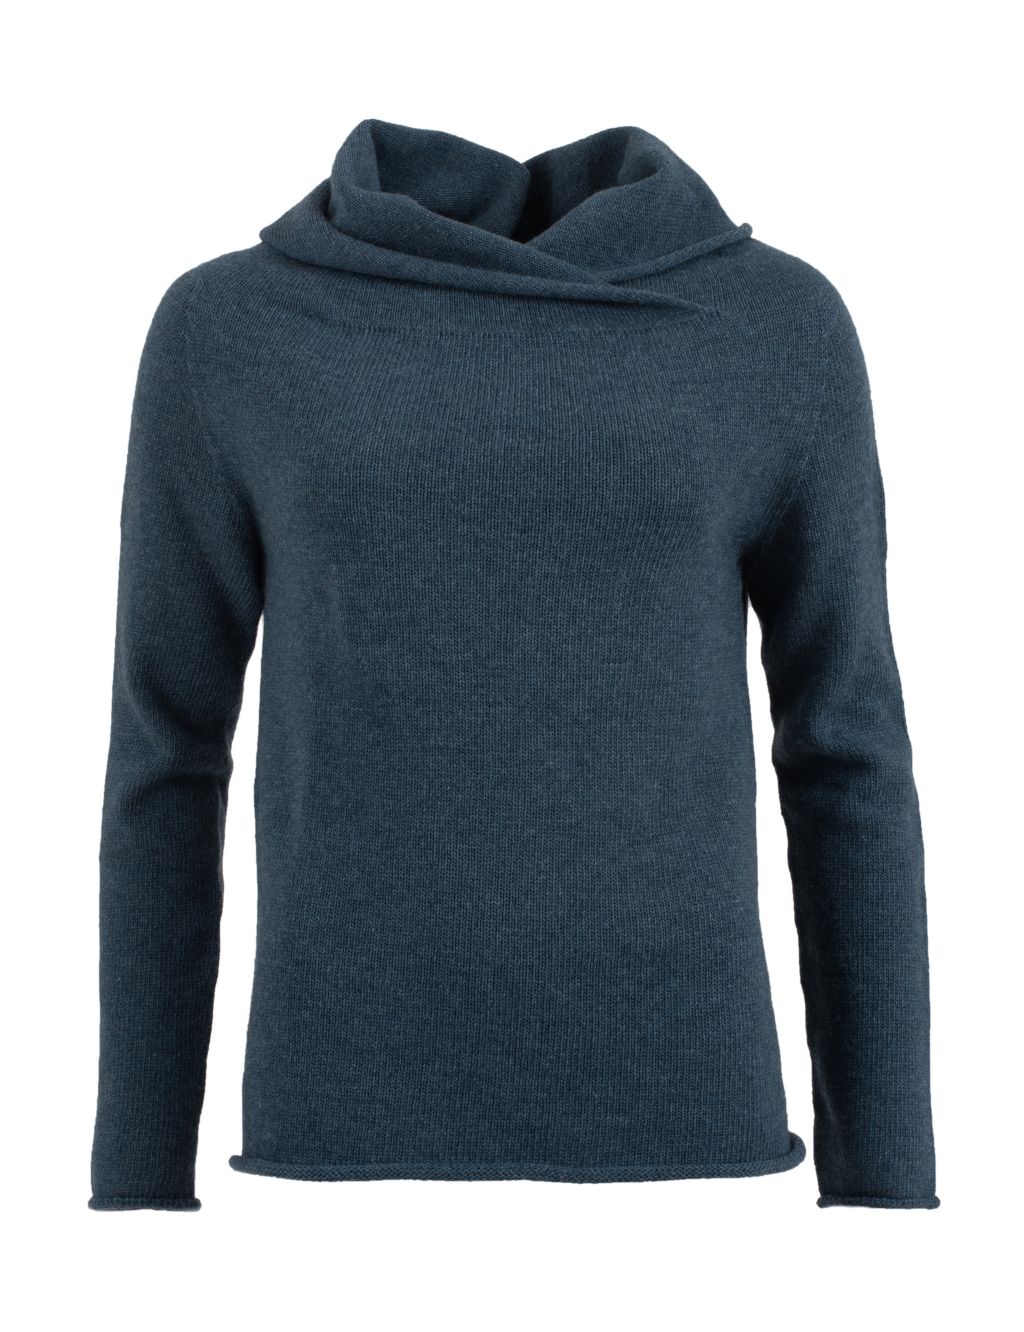 Pure Wool Hooded Neck Jumper image 2